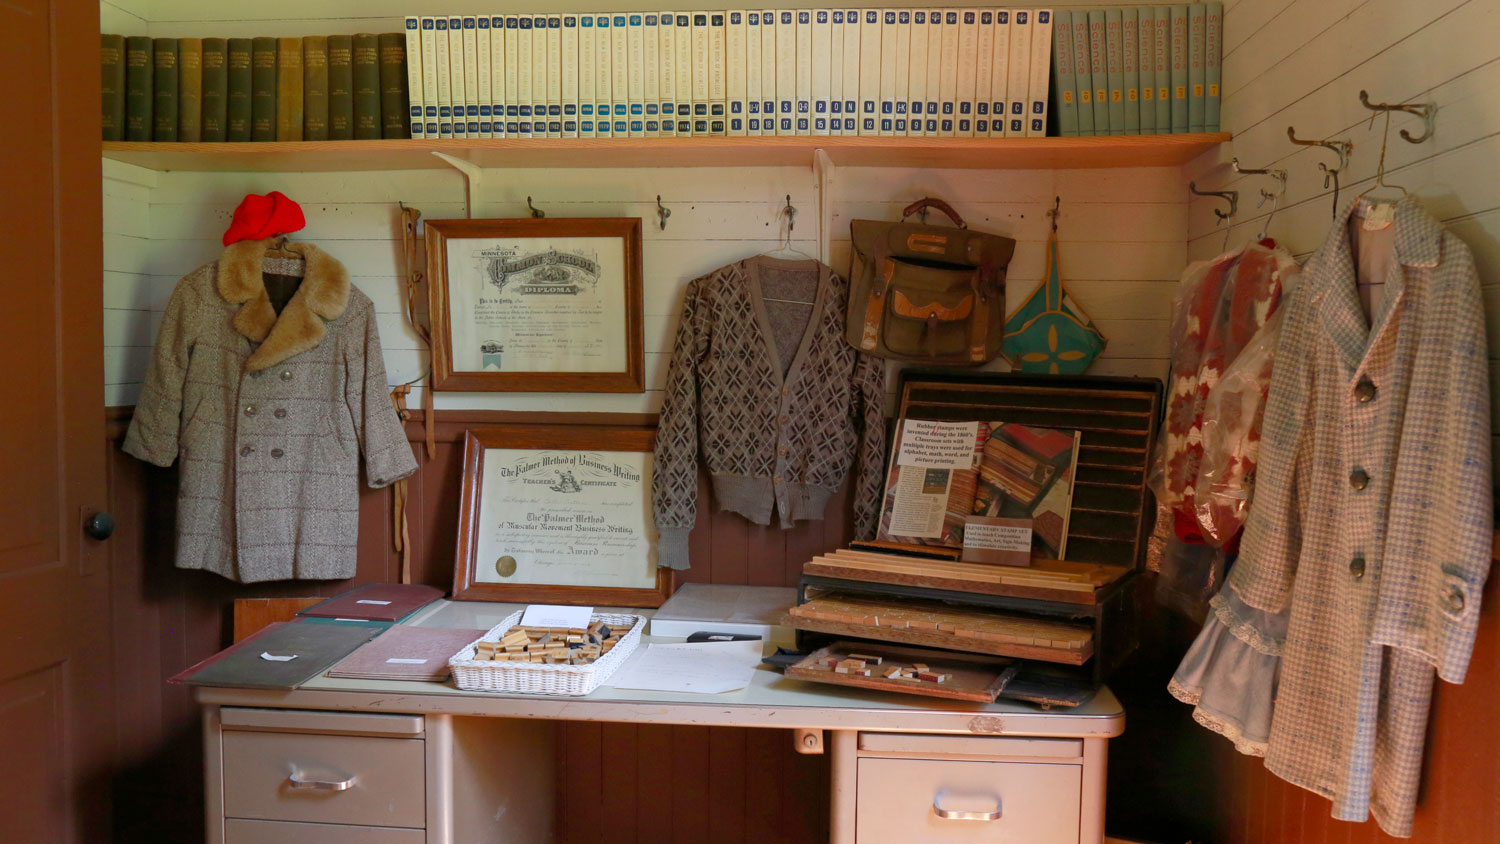 A display with a teacher's desk, clothing and school supplies of bygone eras